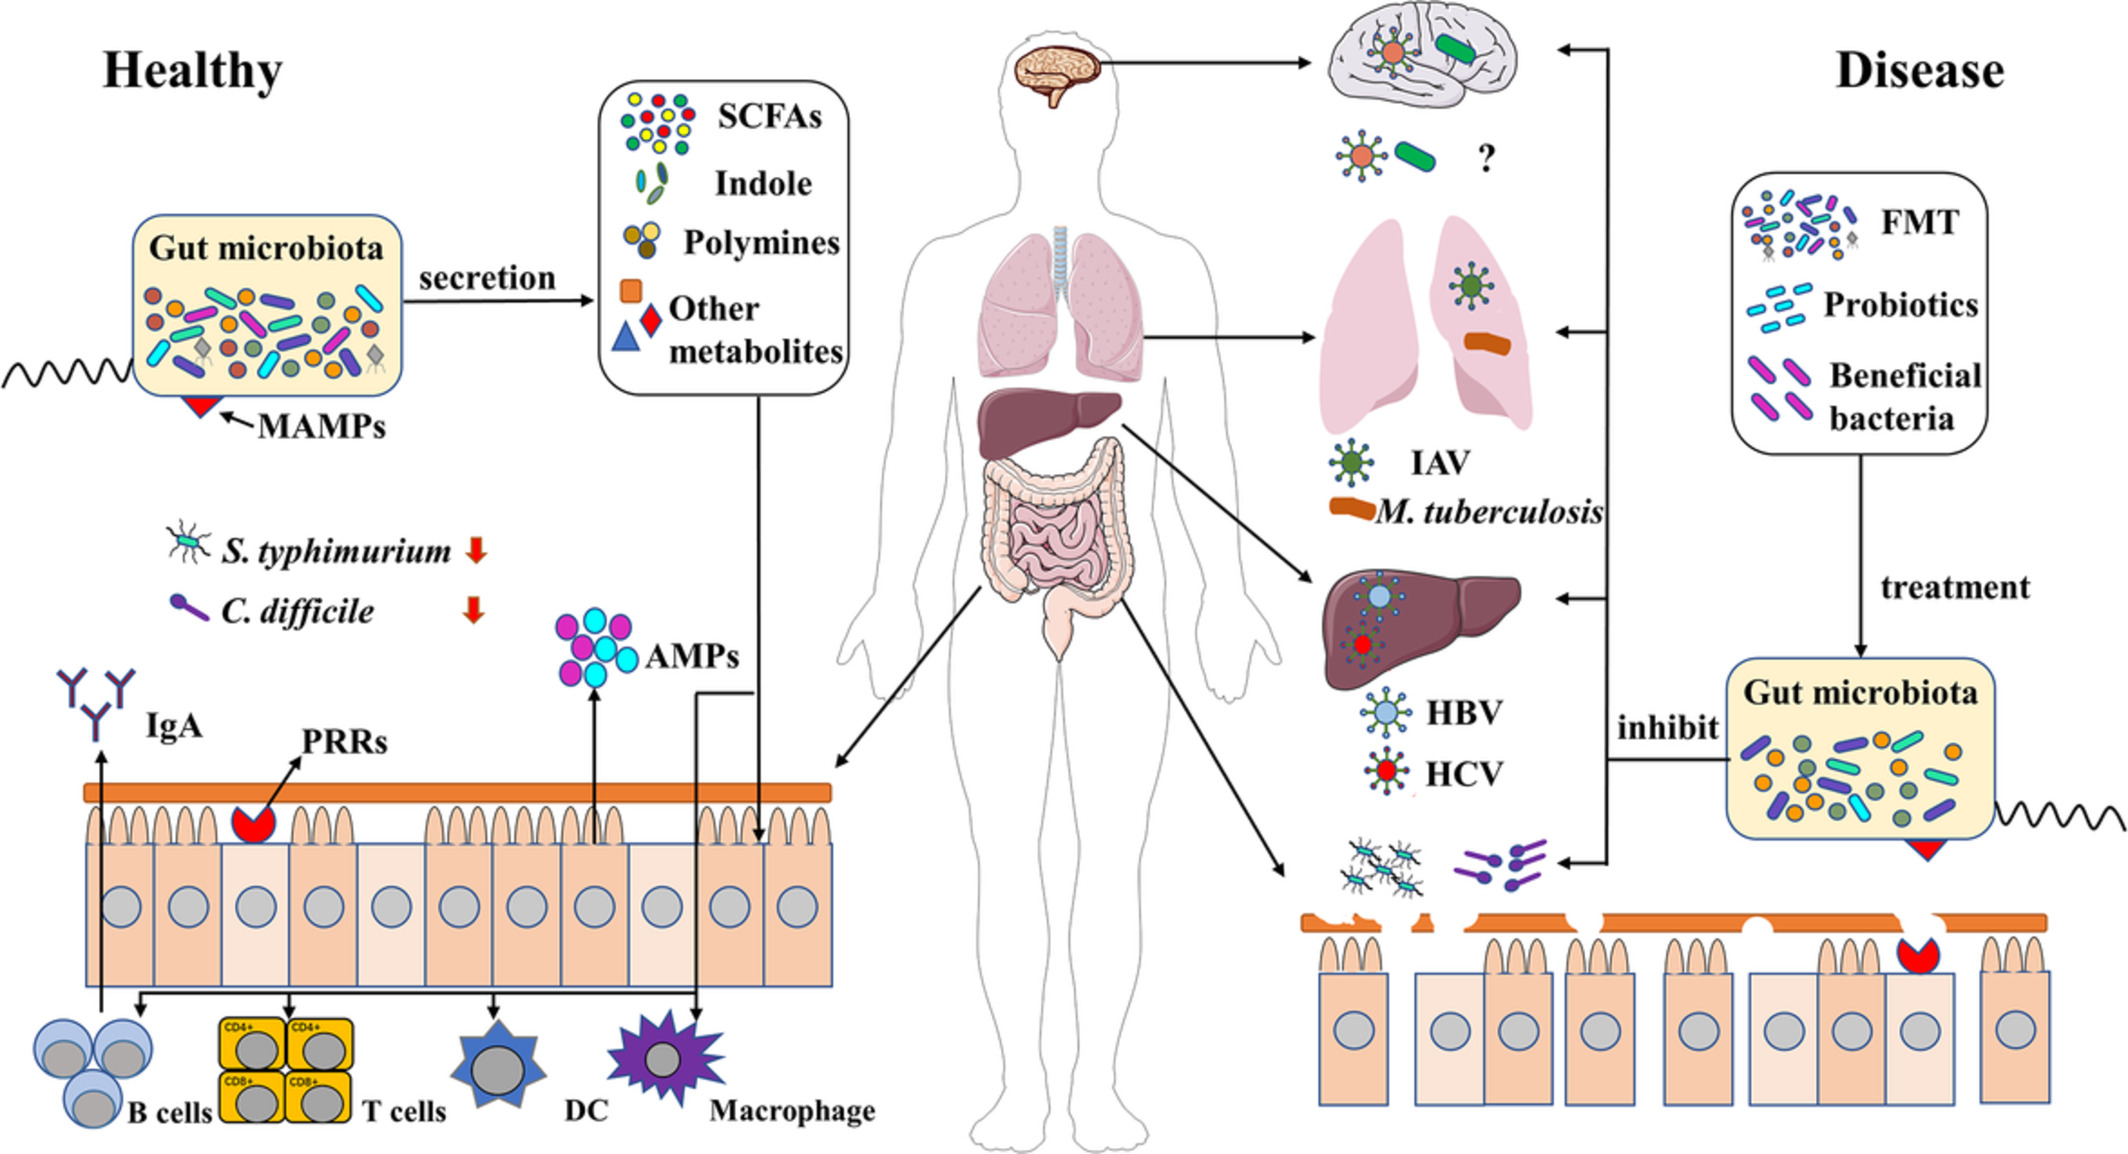 The role of gut microbiota in infectious diseases